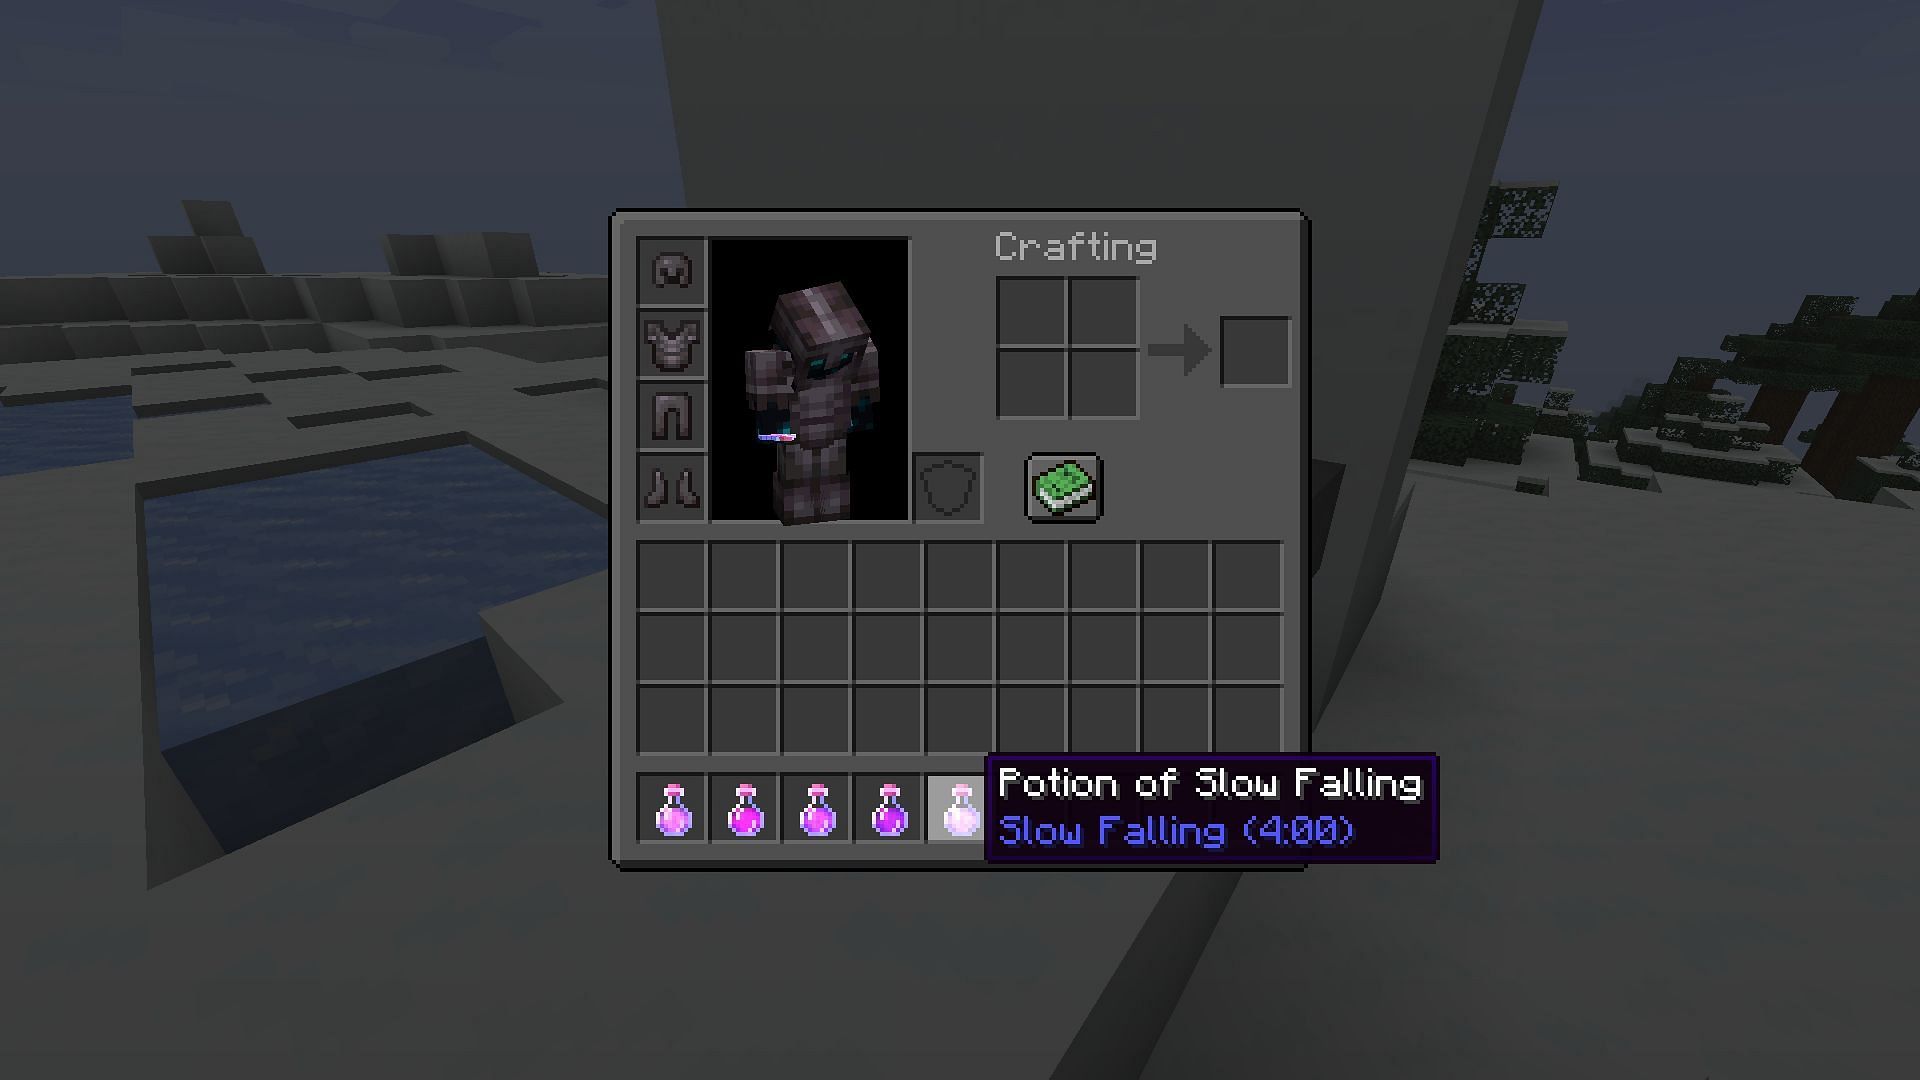 Potion of Slow Falling to prevent fall damage in Minecraft (Image via Mojang)